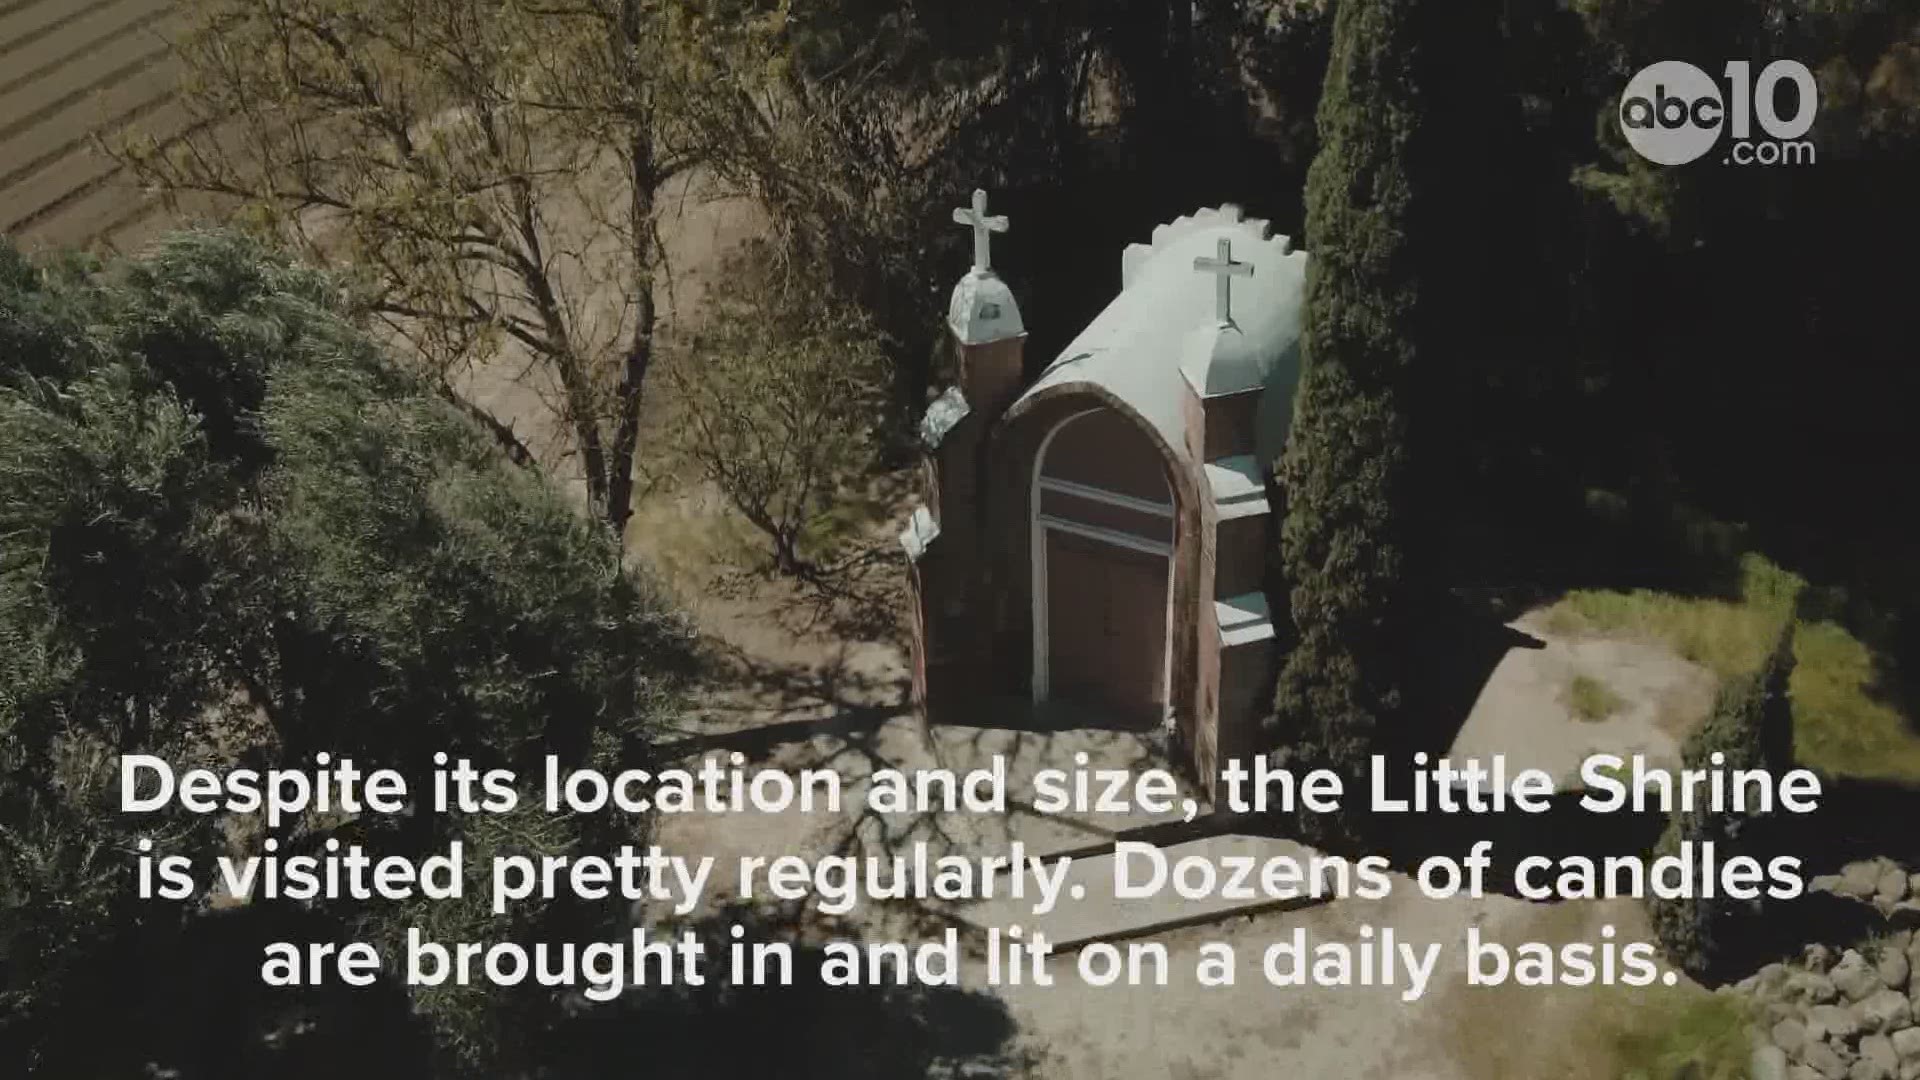 Just off highway 45 in Colusa County is quite possibly the smallest church in California. It's called the Shrine of Our Lady of Sorrows, but most people who visit the roadside chapel call it "The Little Shrine."